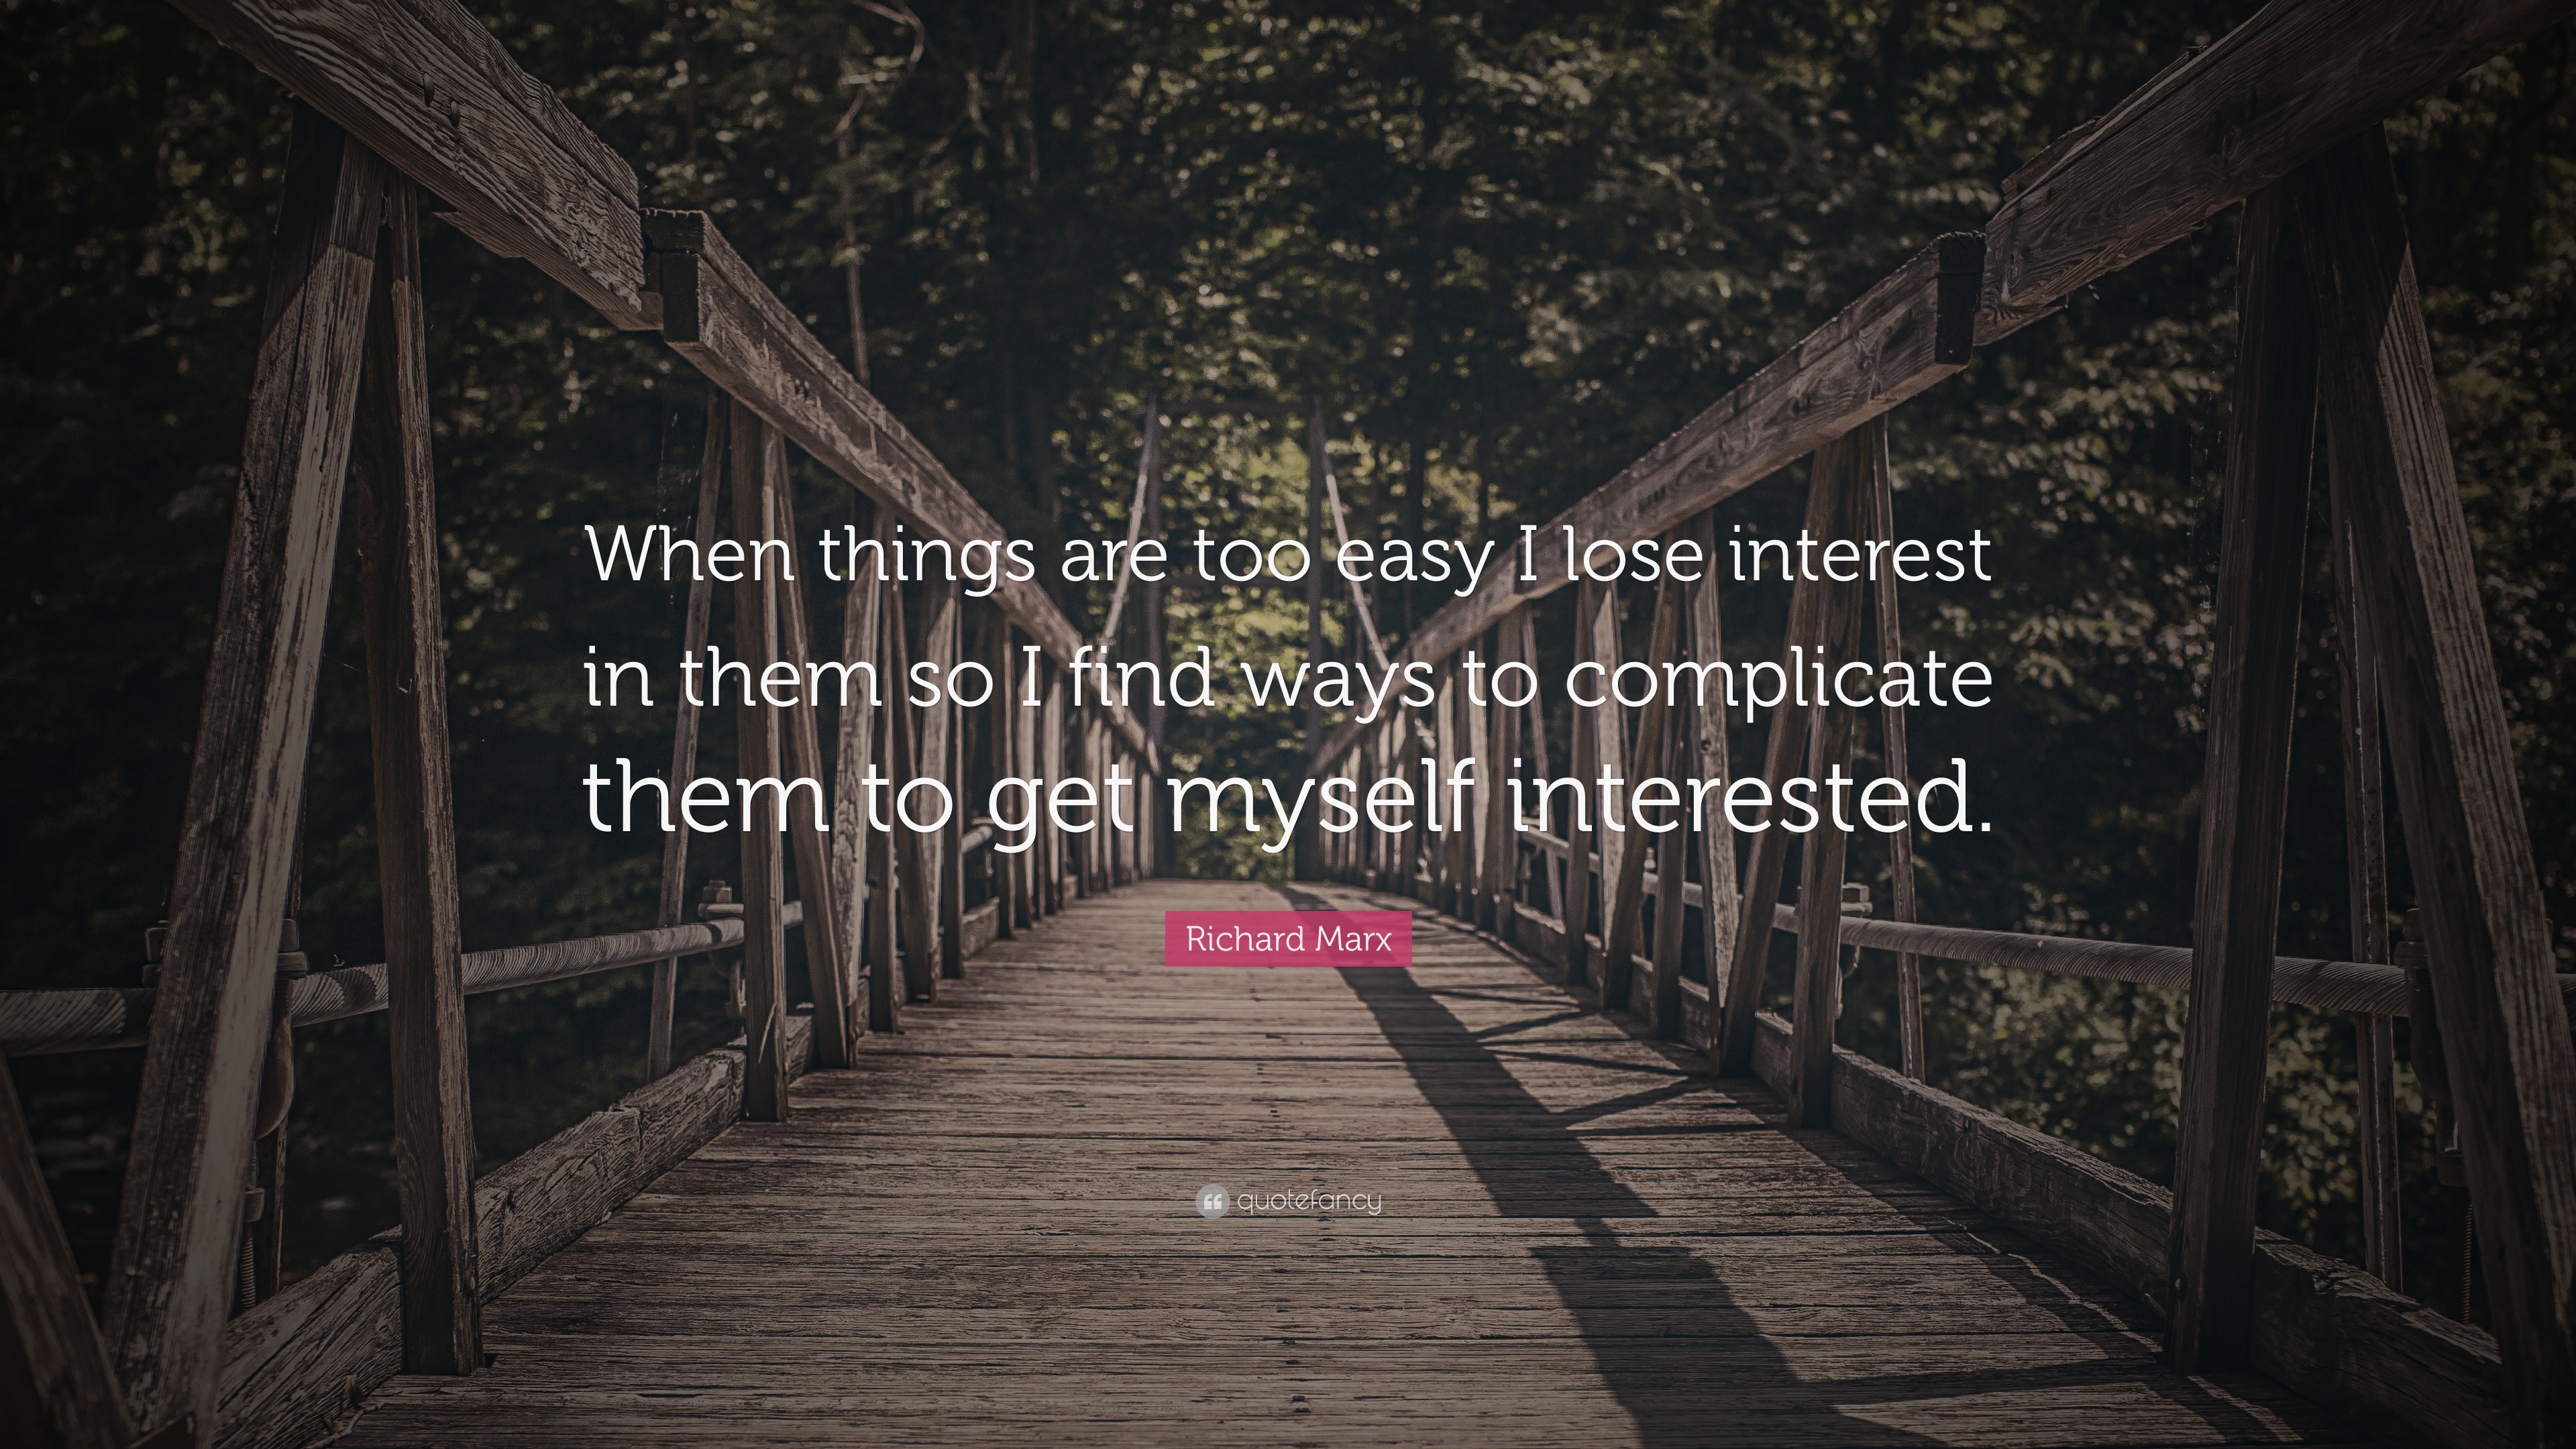 Richard Marx Quote: “When things are too easy I lose interest in them so I  find